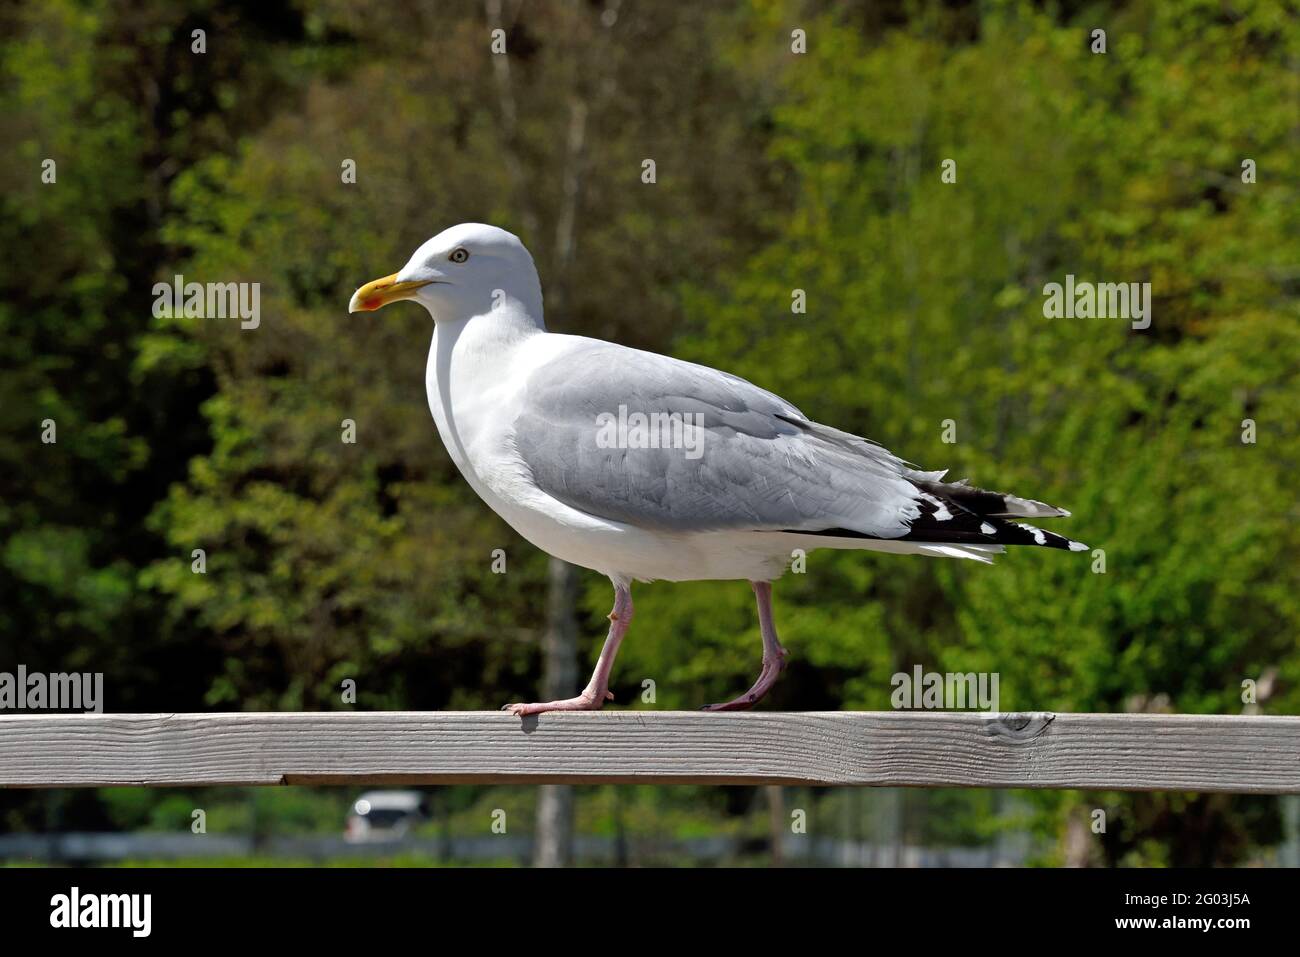 An adult Herring Gull (Larus argentatus) walking along a wooden fence in a wetland area in Southern England Stock Photo